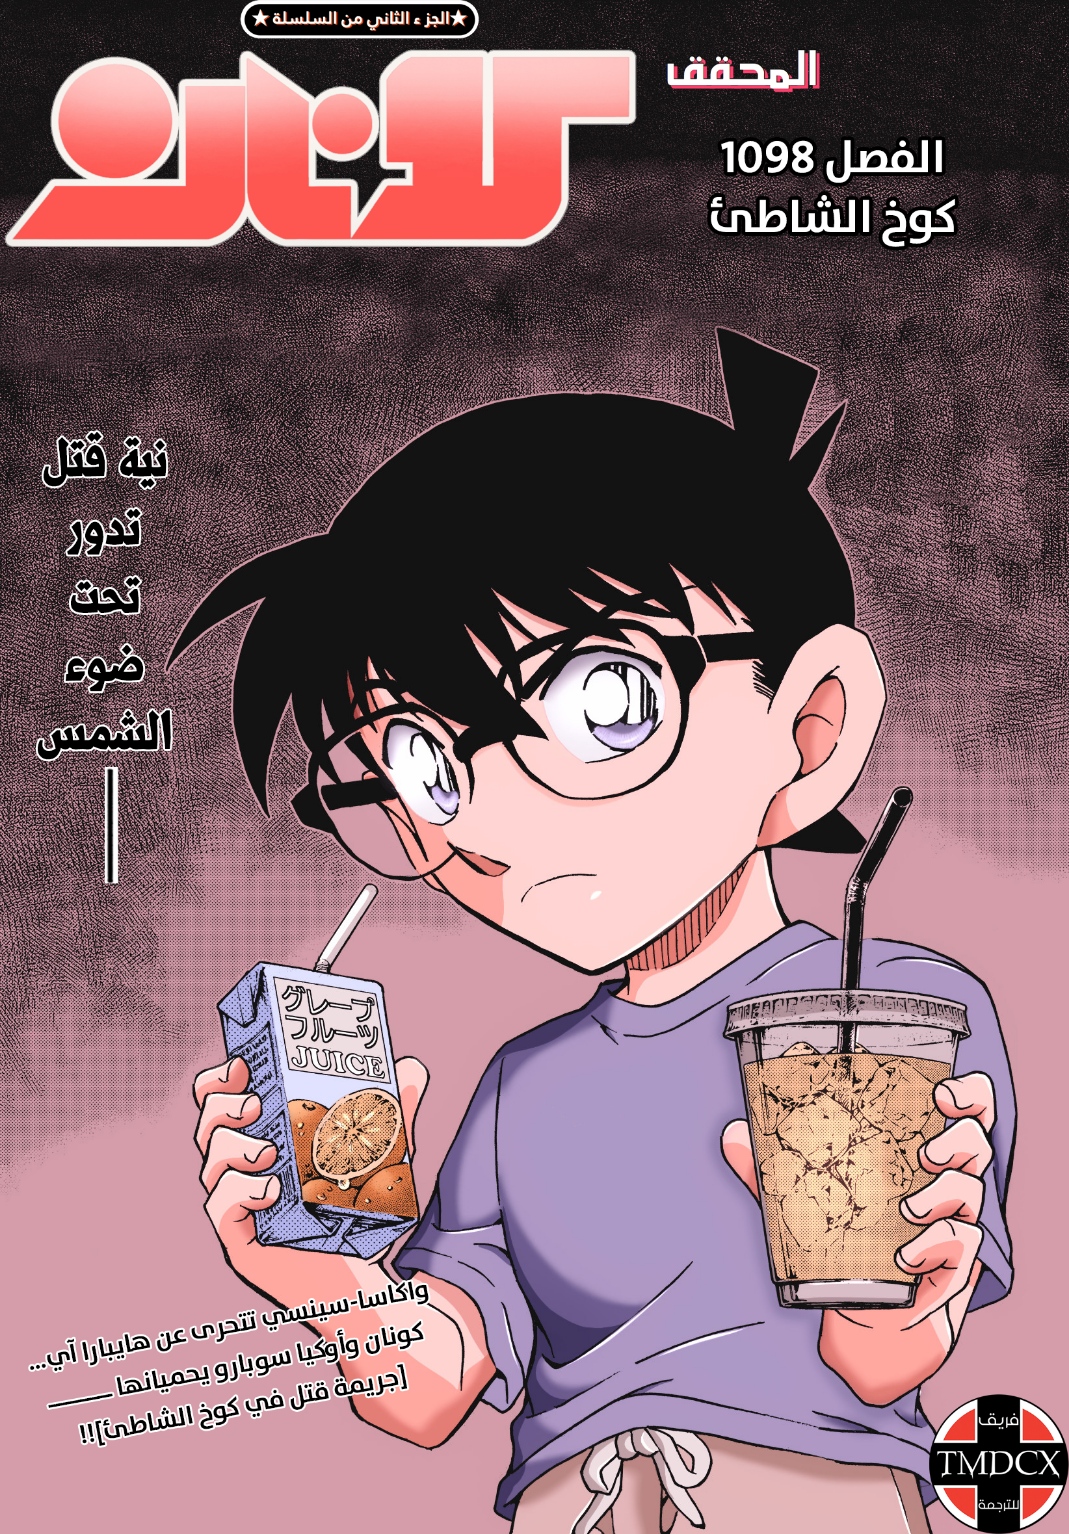 Detective Conan: Chapter 1098 - Page 1